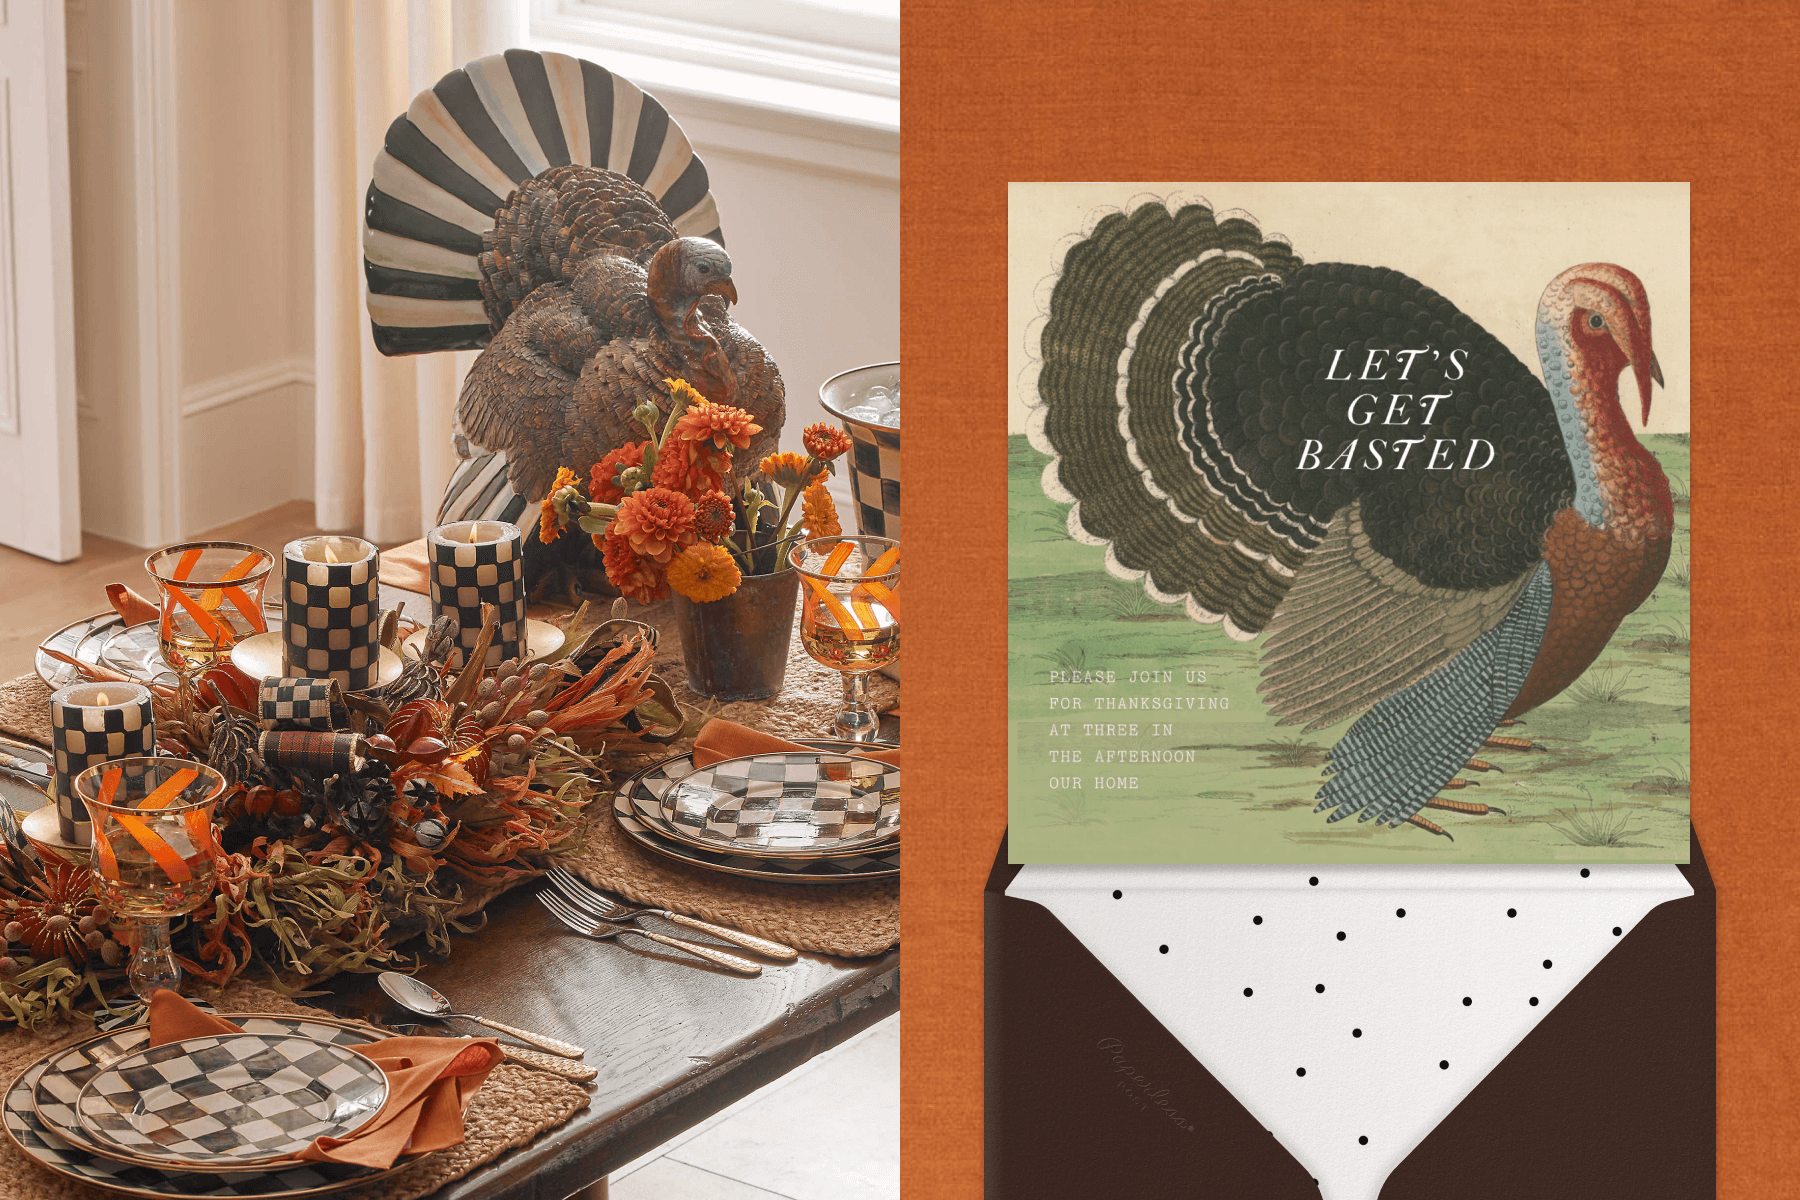  Left: A table set with checkerboard tableware and a striped turkey figurine. Right: An invitation with a drawing of a turkey and the words “Let’s get basted.”